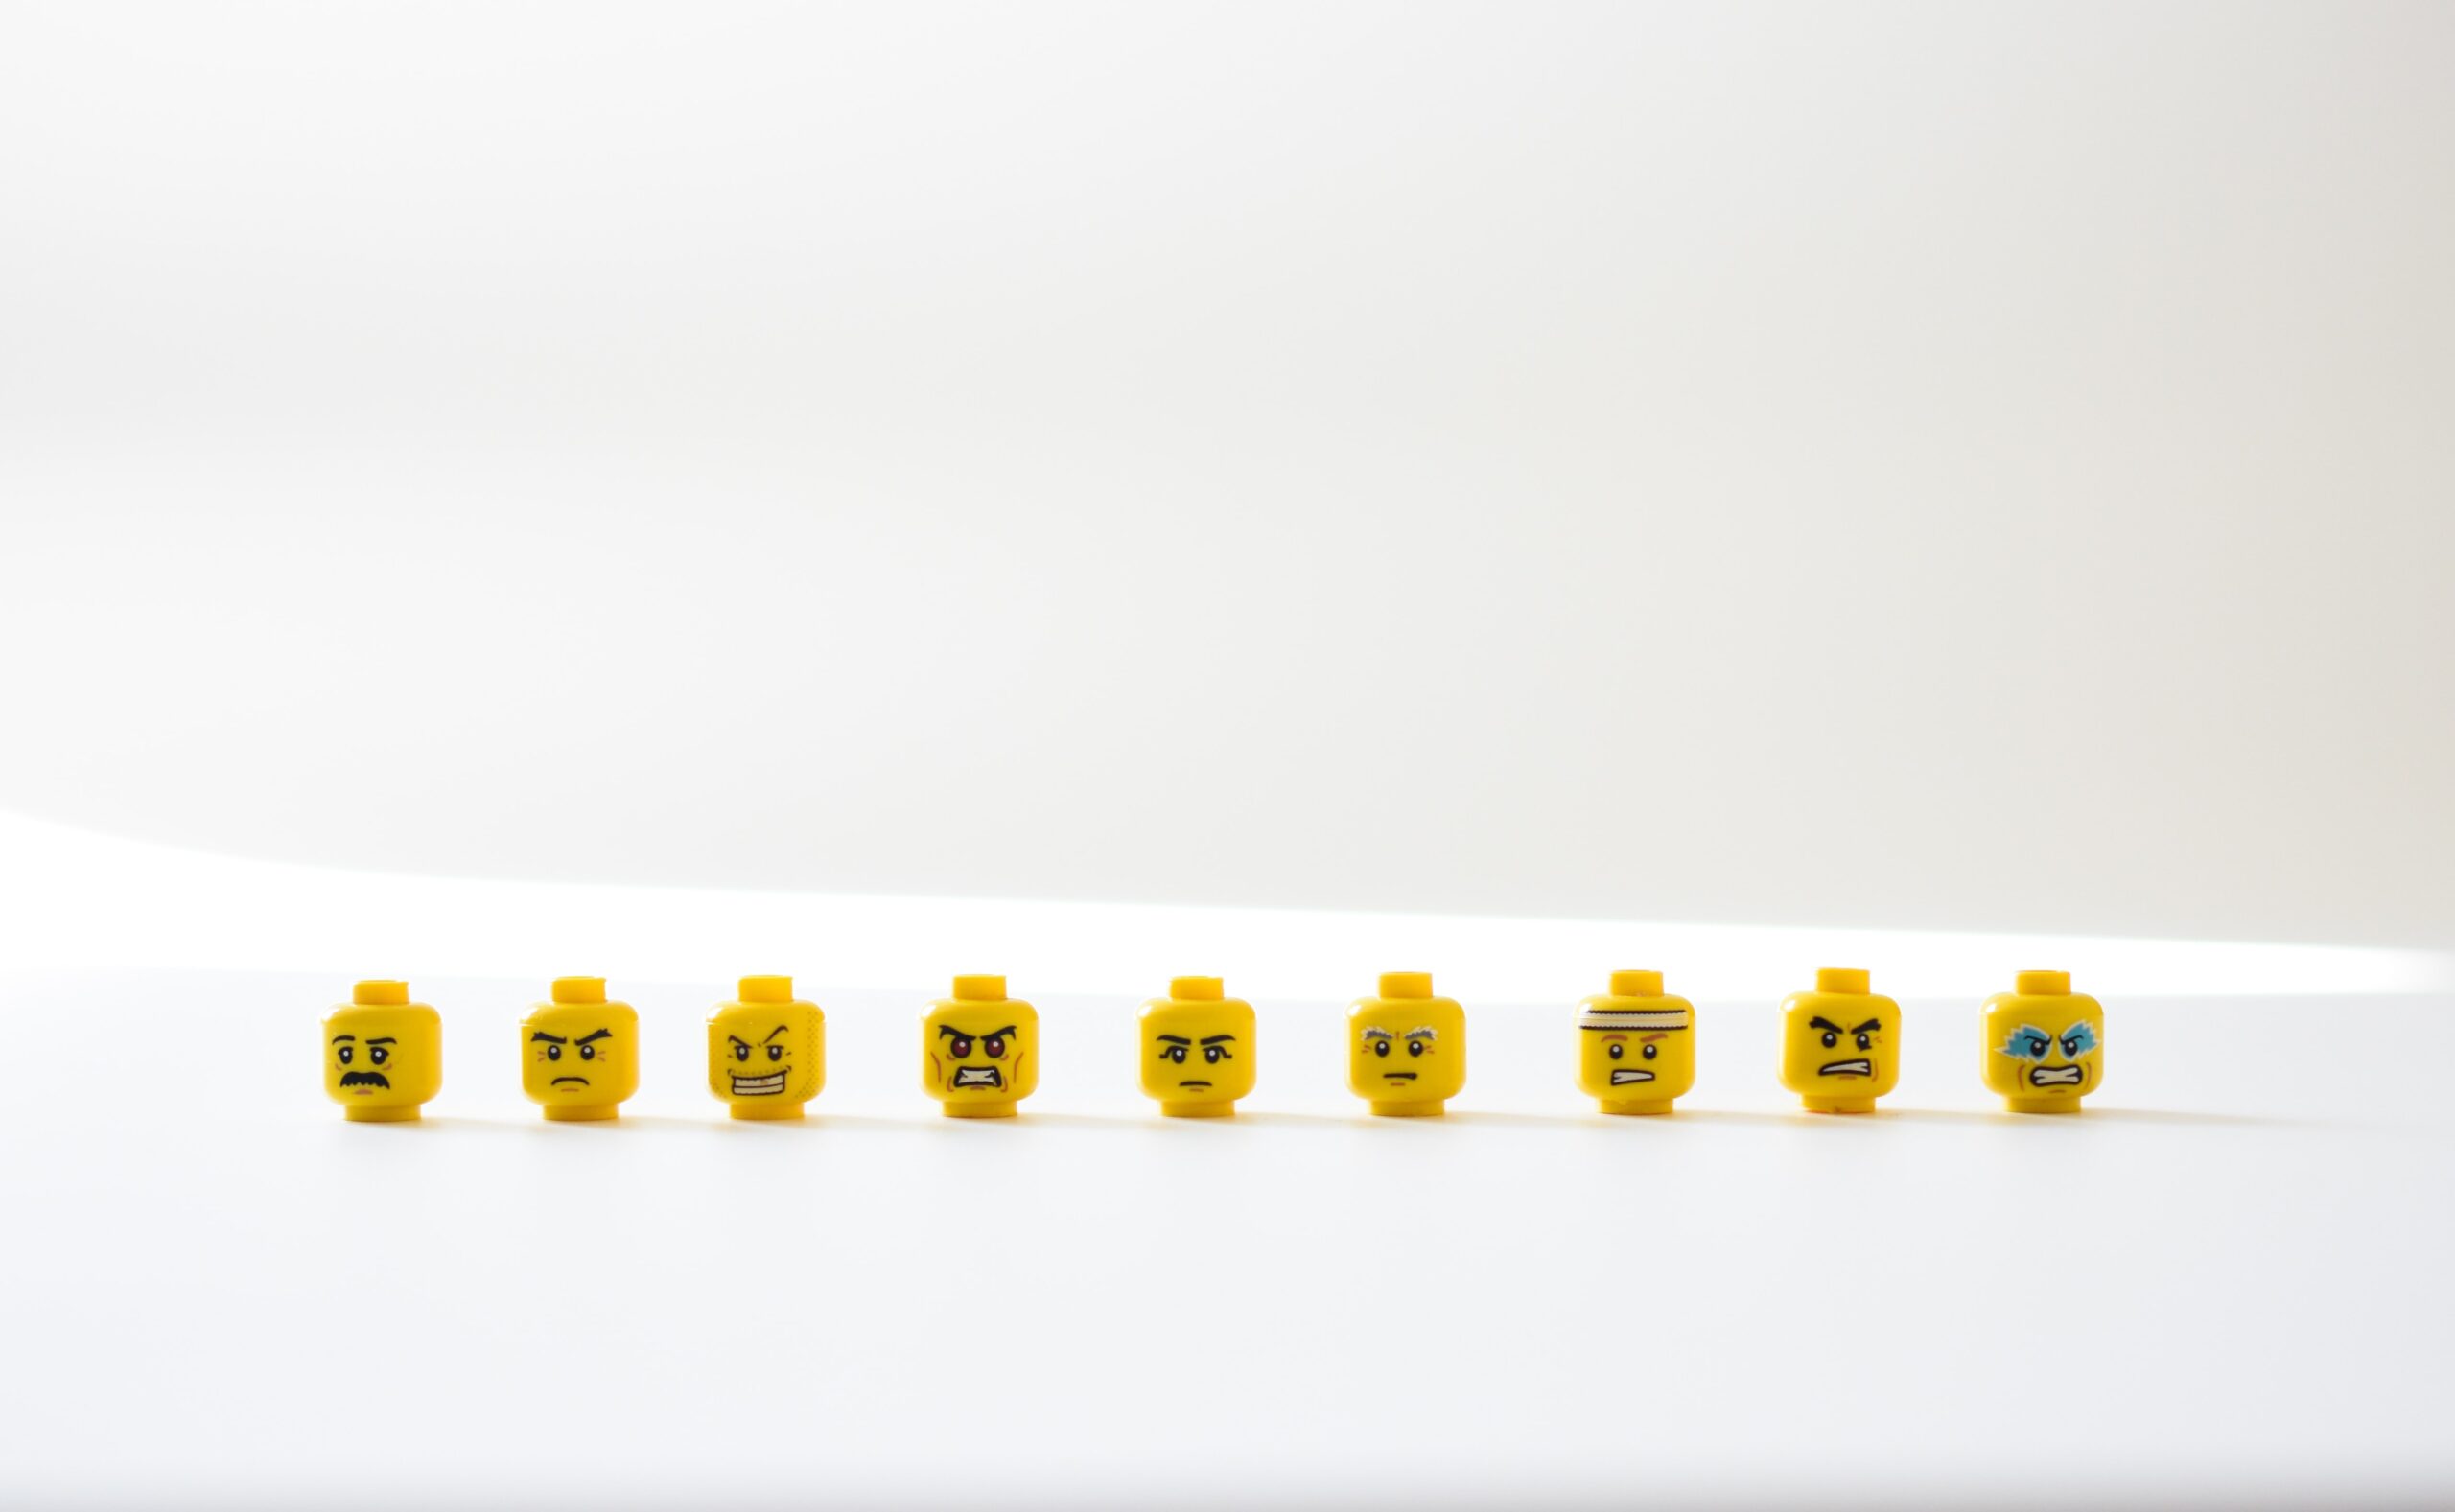 Row of unhappy lego faces representing negative feedback. Image by Nik on Unsplash.